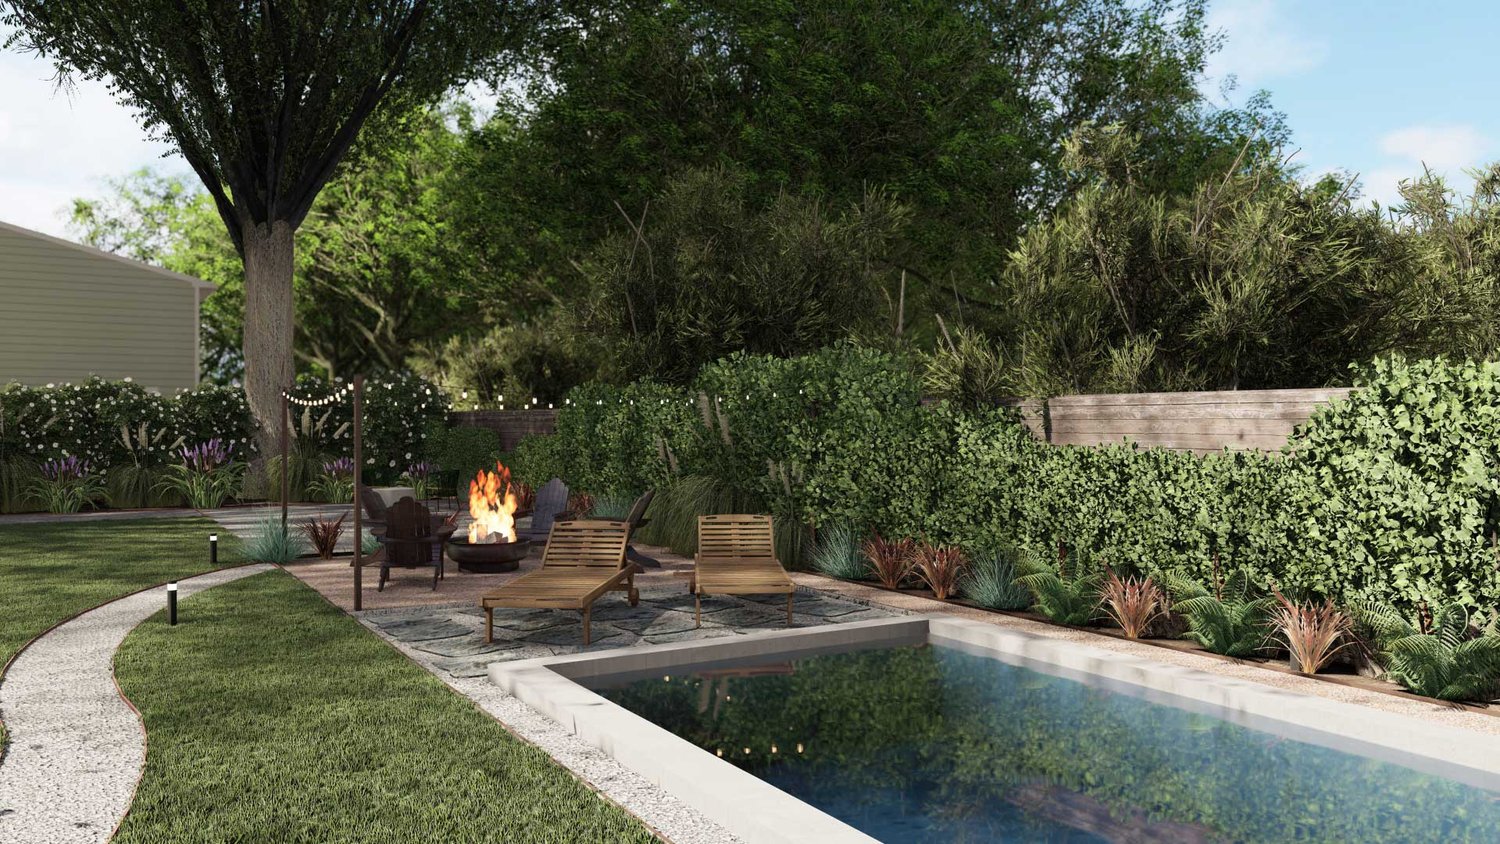 Arlington backyard pool, fire pit seating area with gravel path, alongside trees and plants